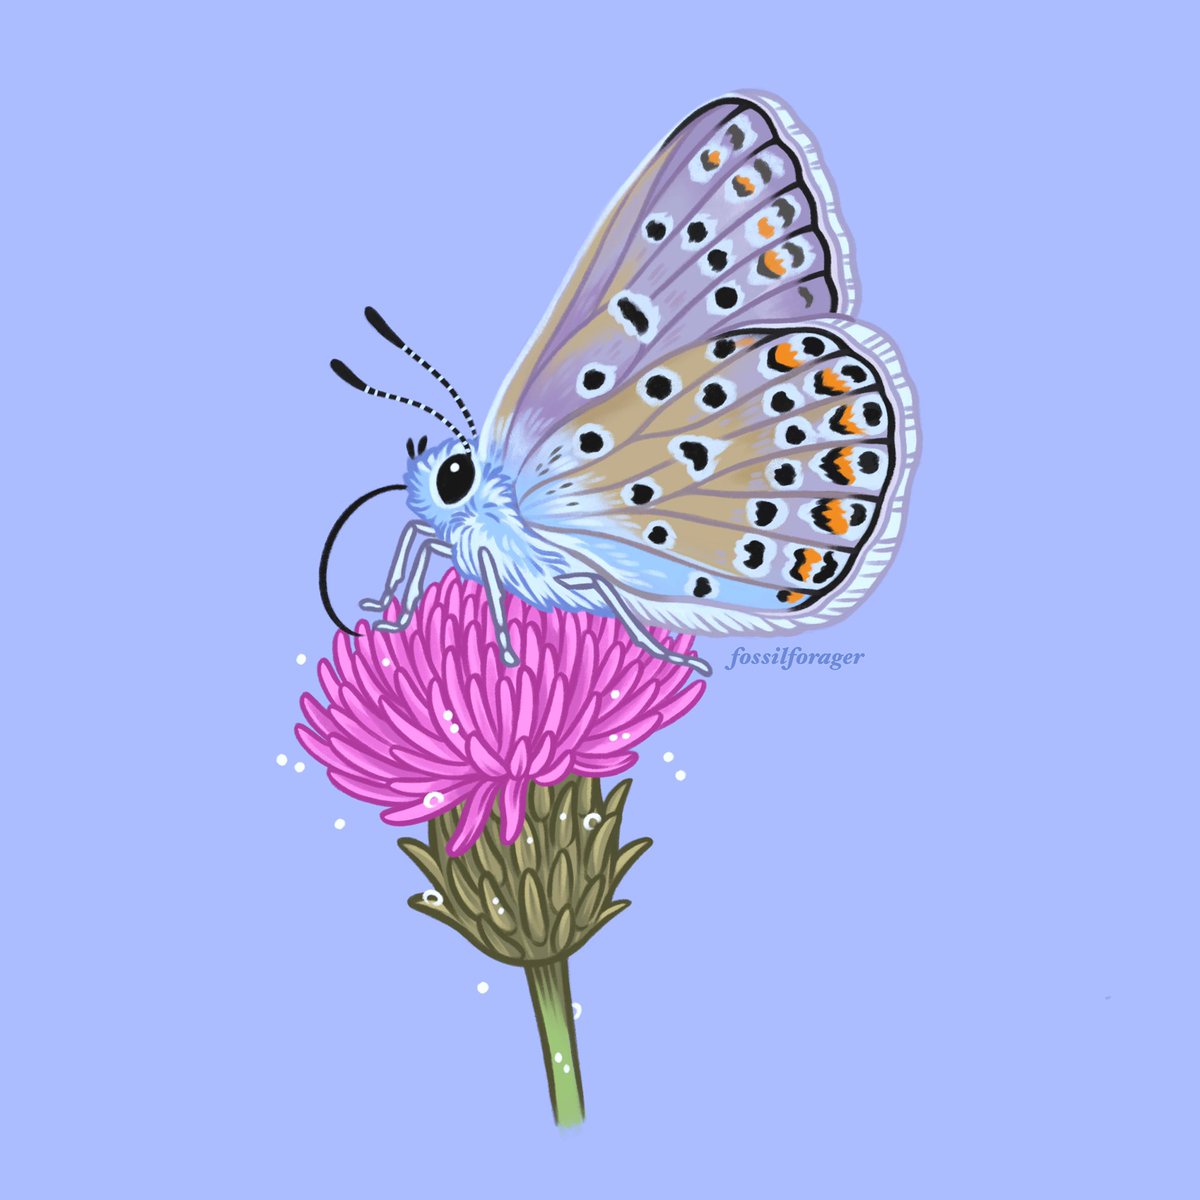 Common Blue from a few months ago 🌸 hope everyone is having a good start to their week!